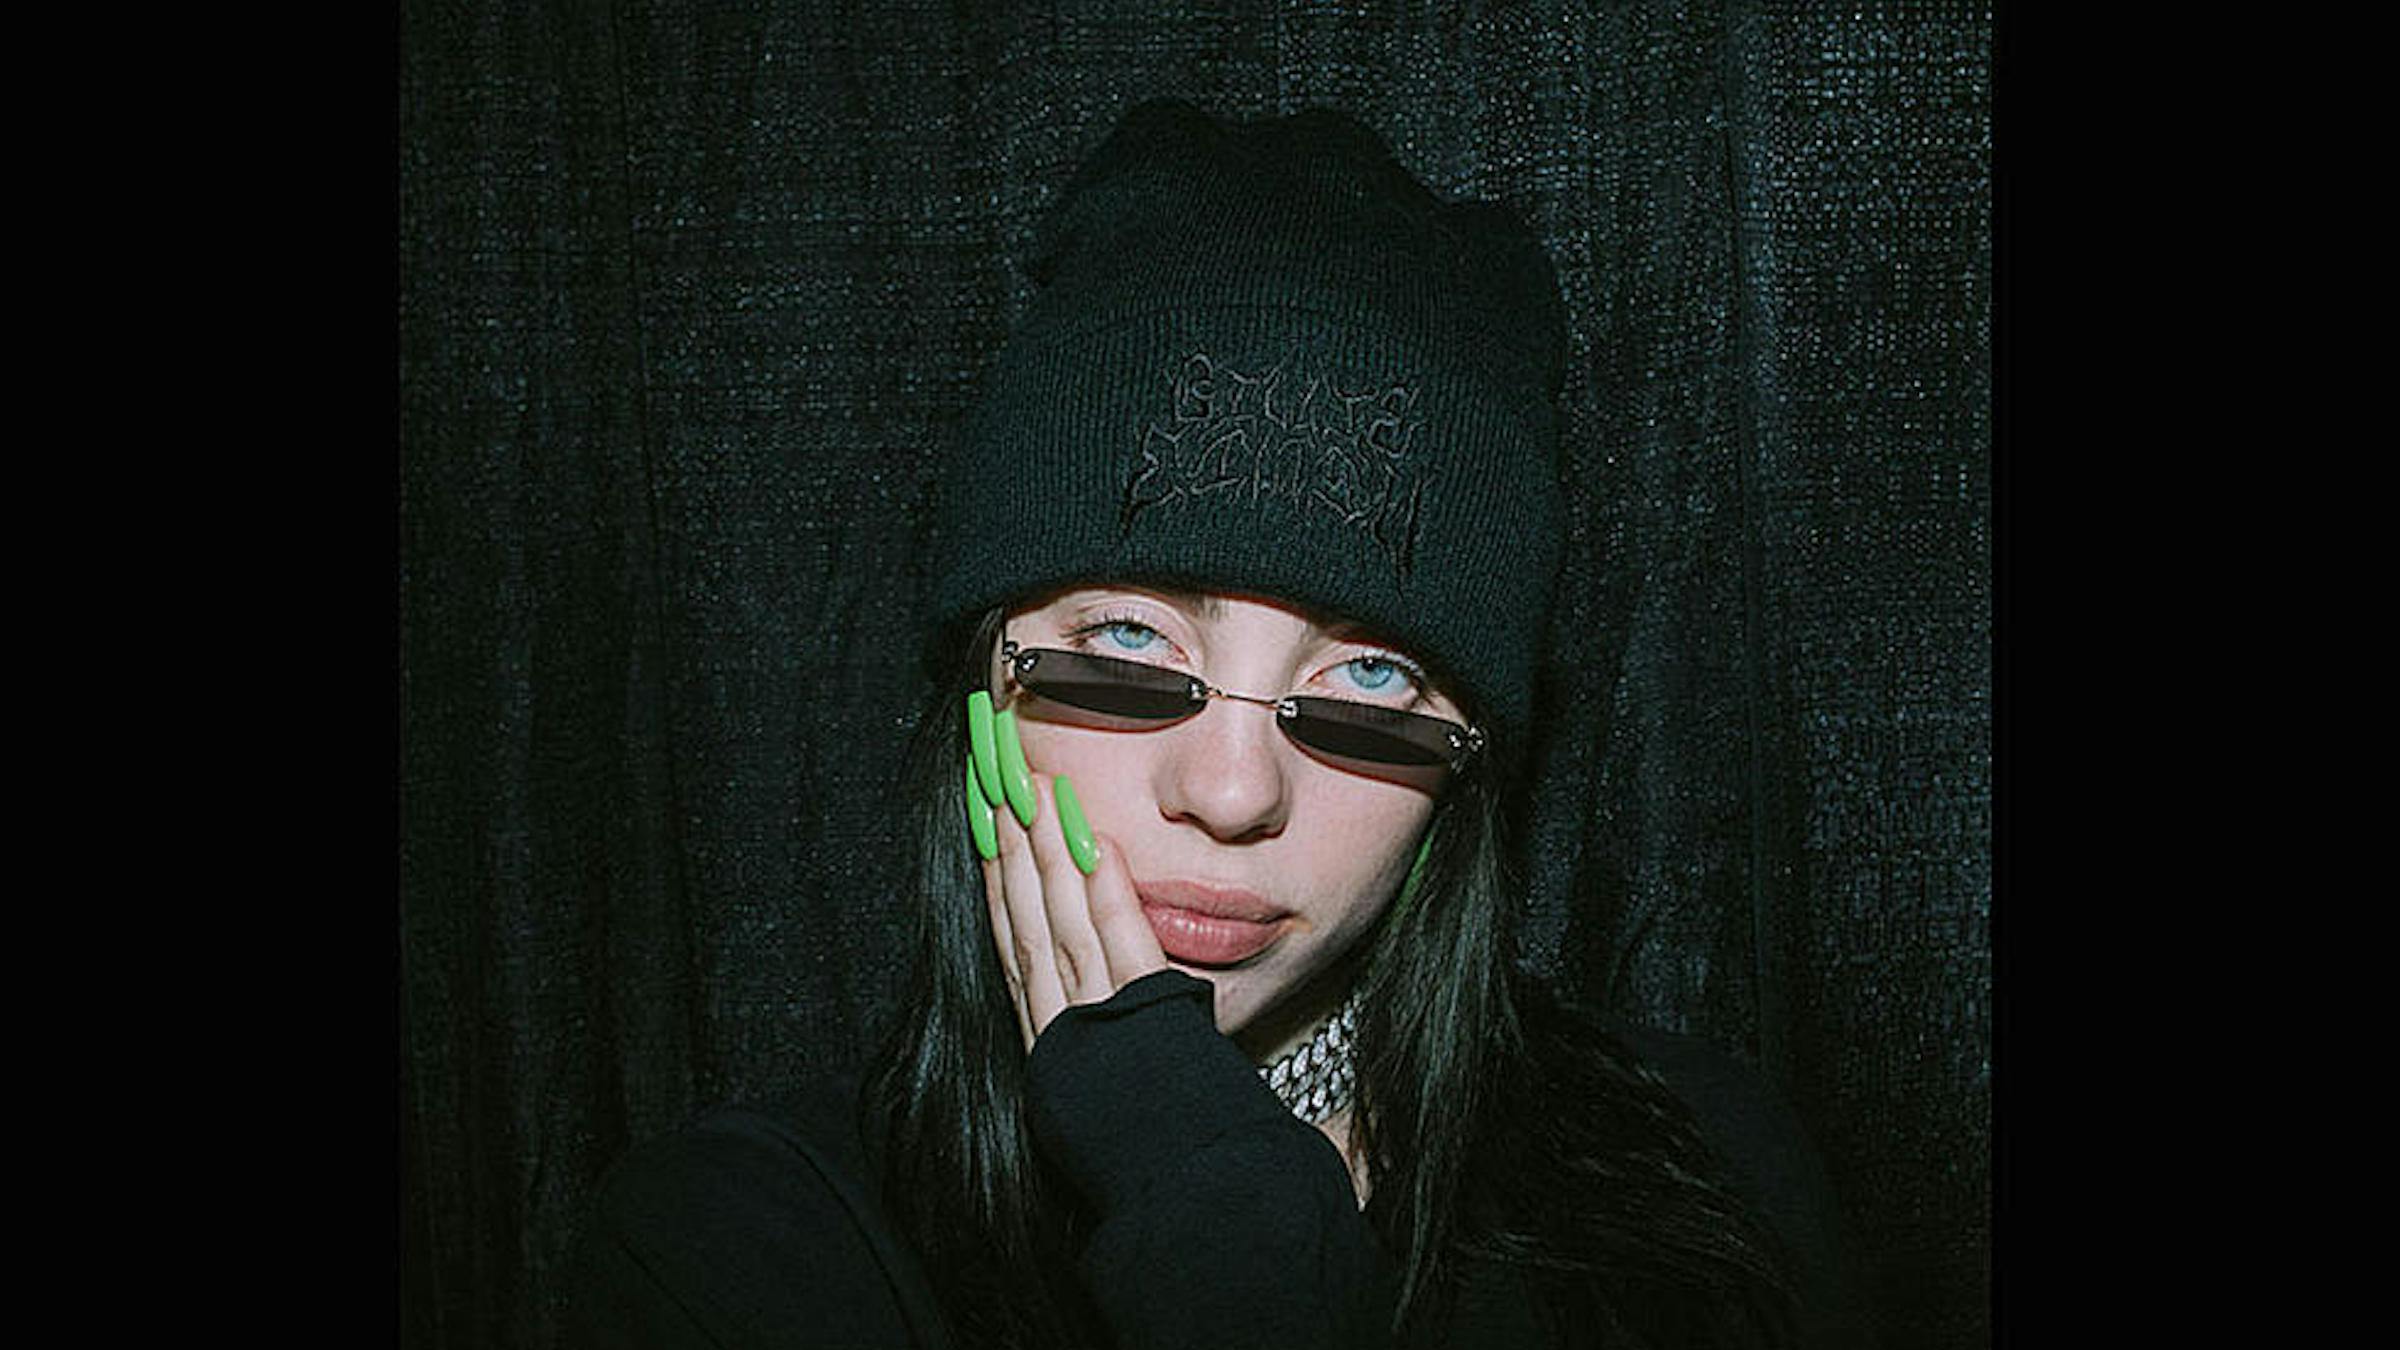 Billie Eilish Is Selling Beanies Featuring Her Name As A Death Metal Logo